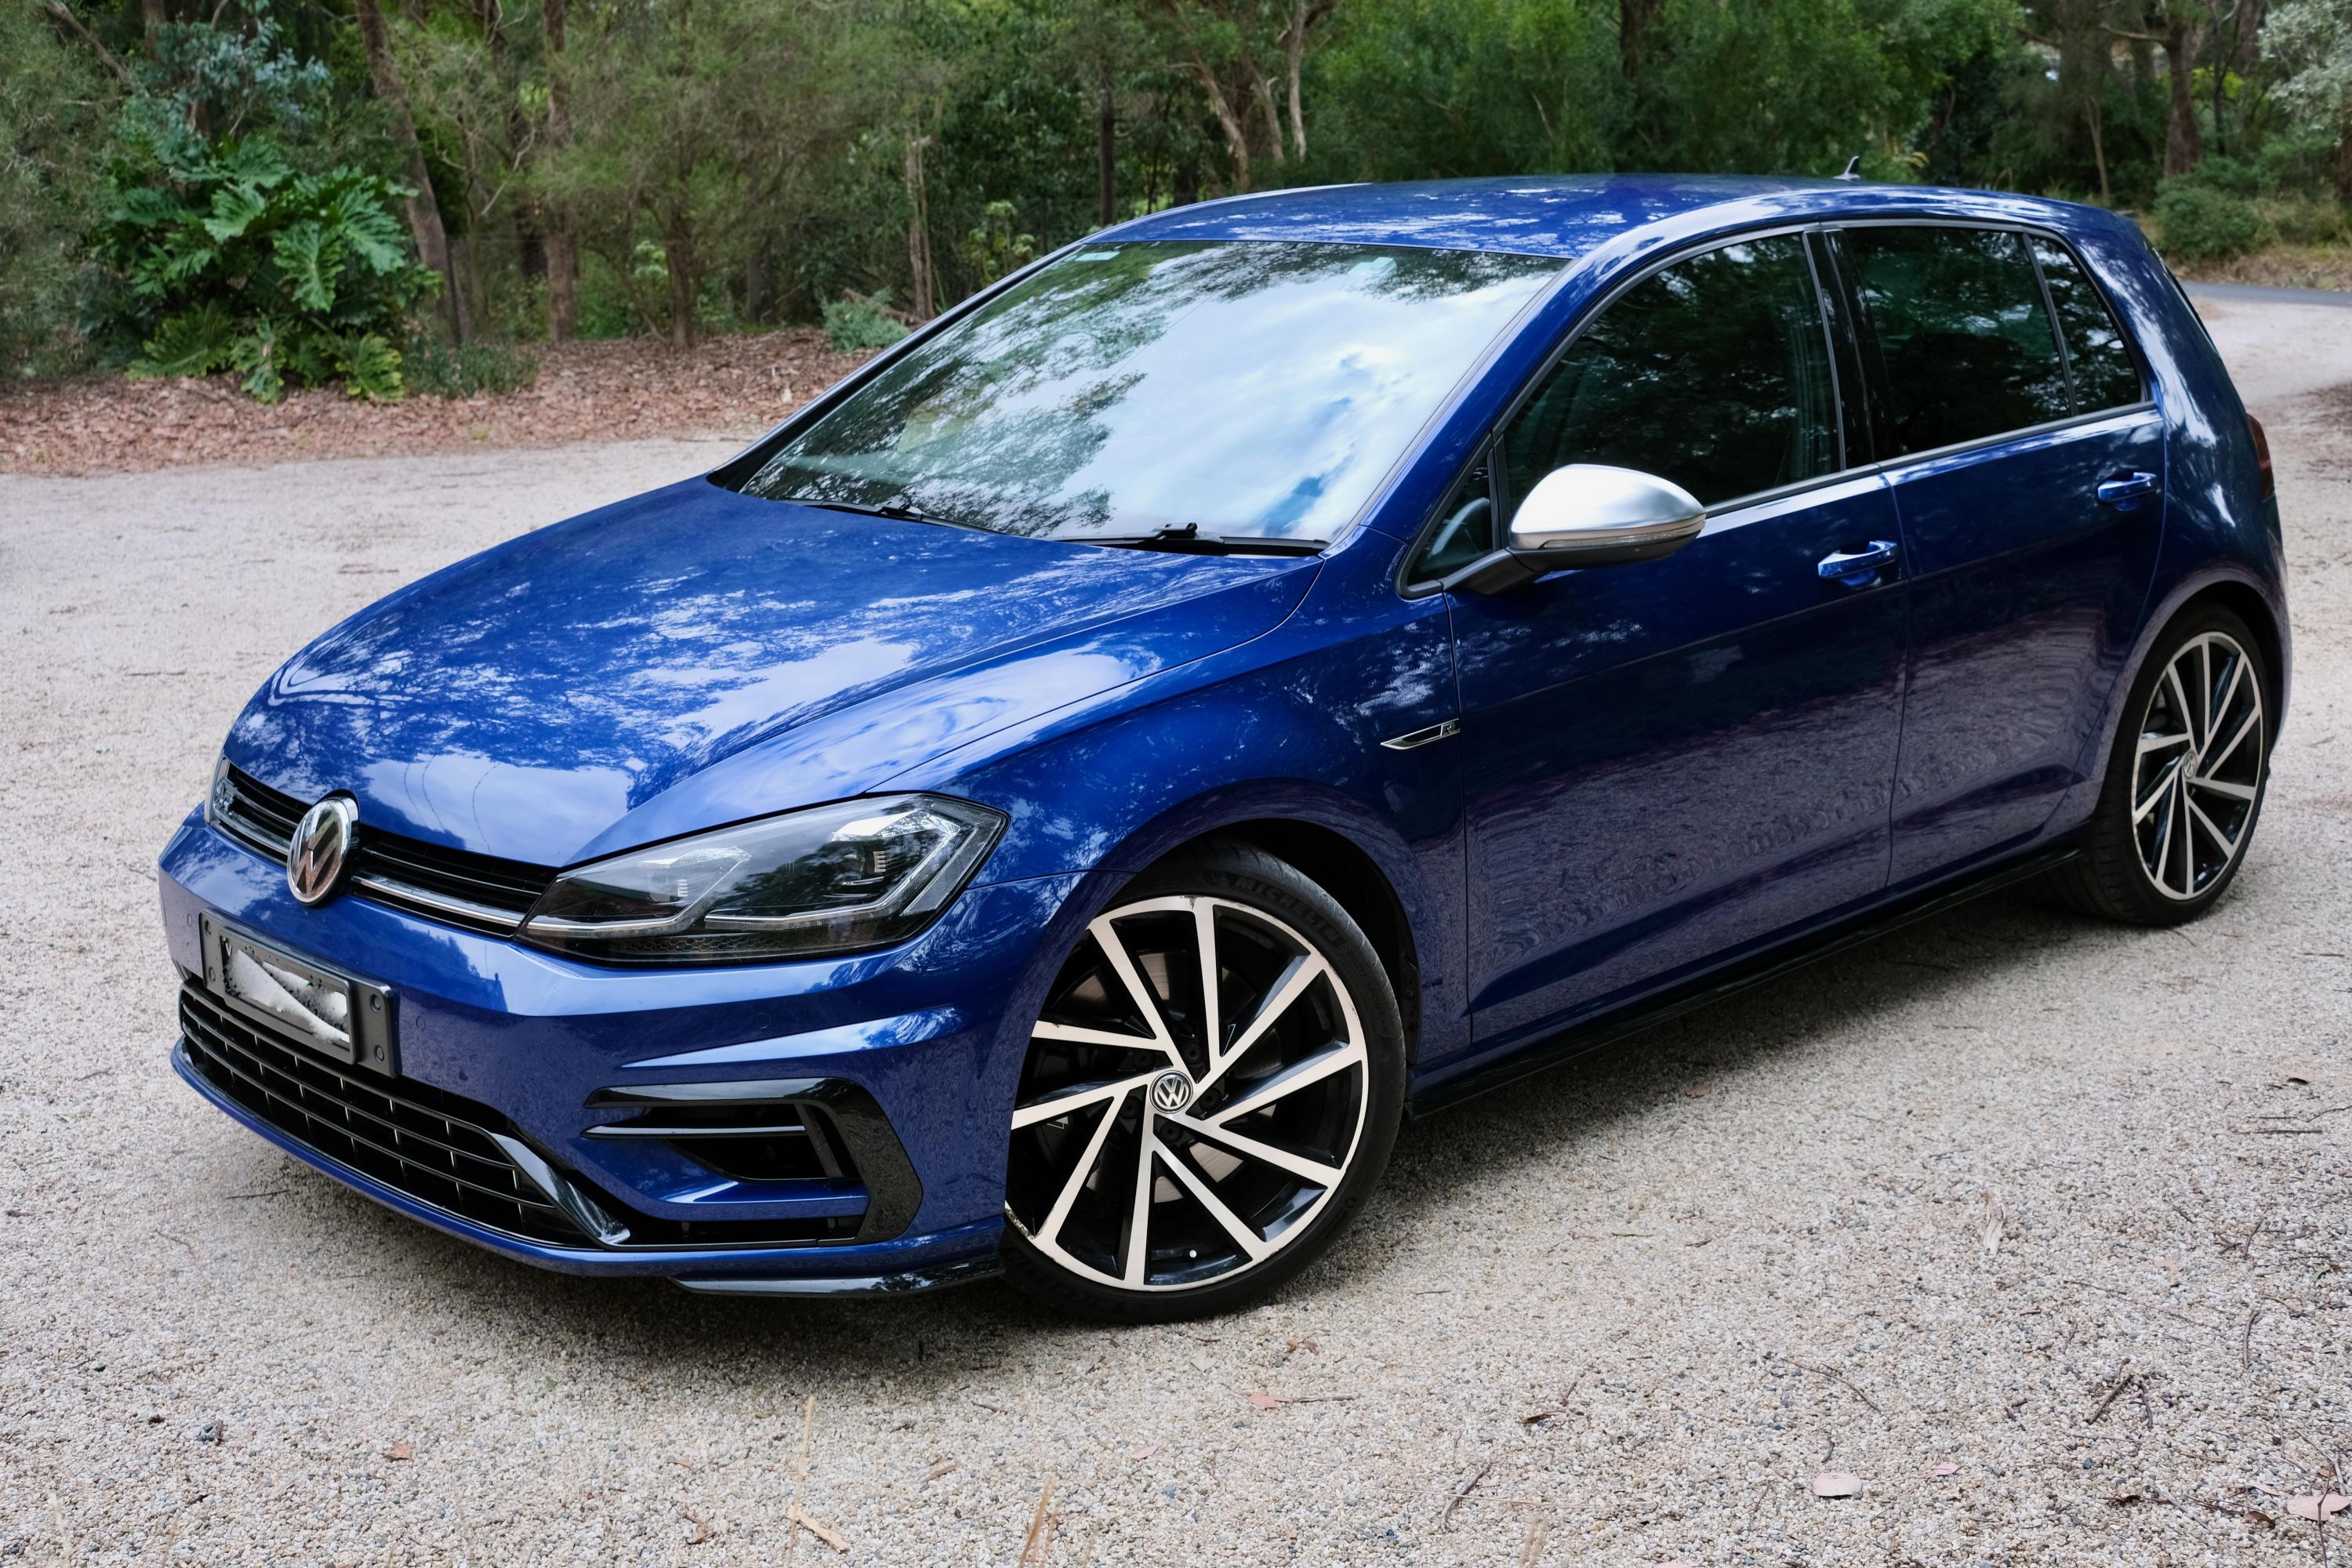 Volkswagen Golf News and Reviews